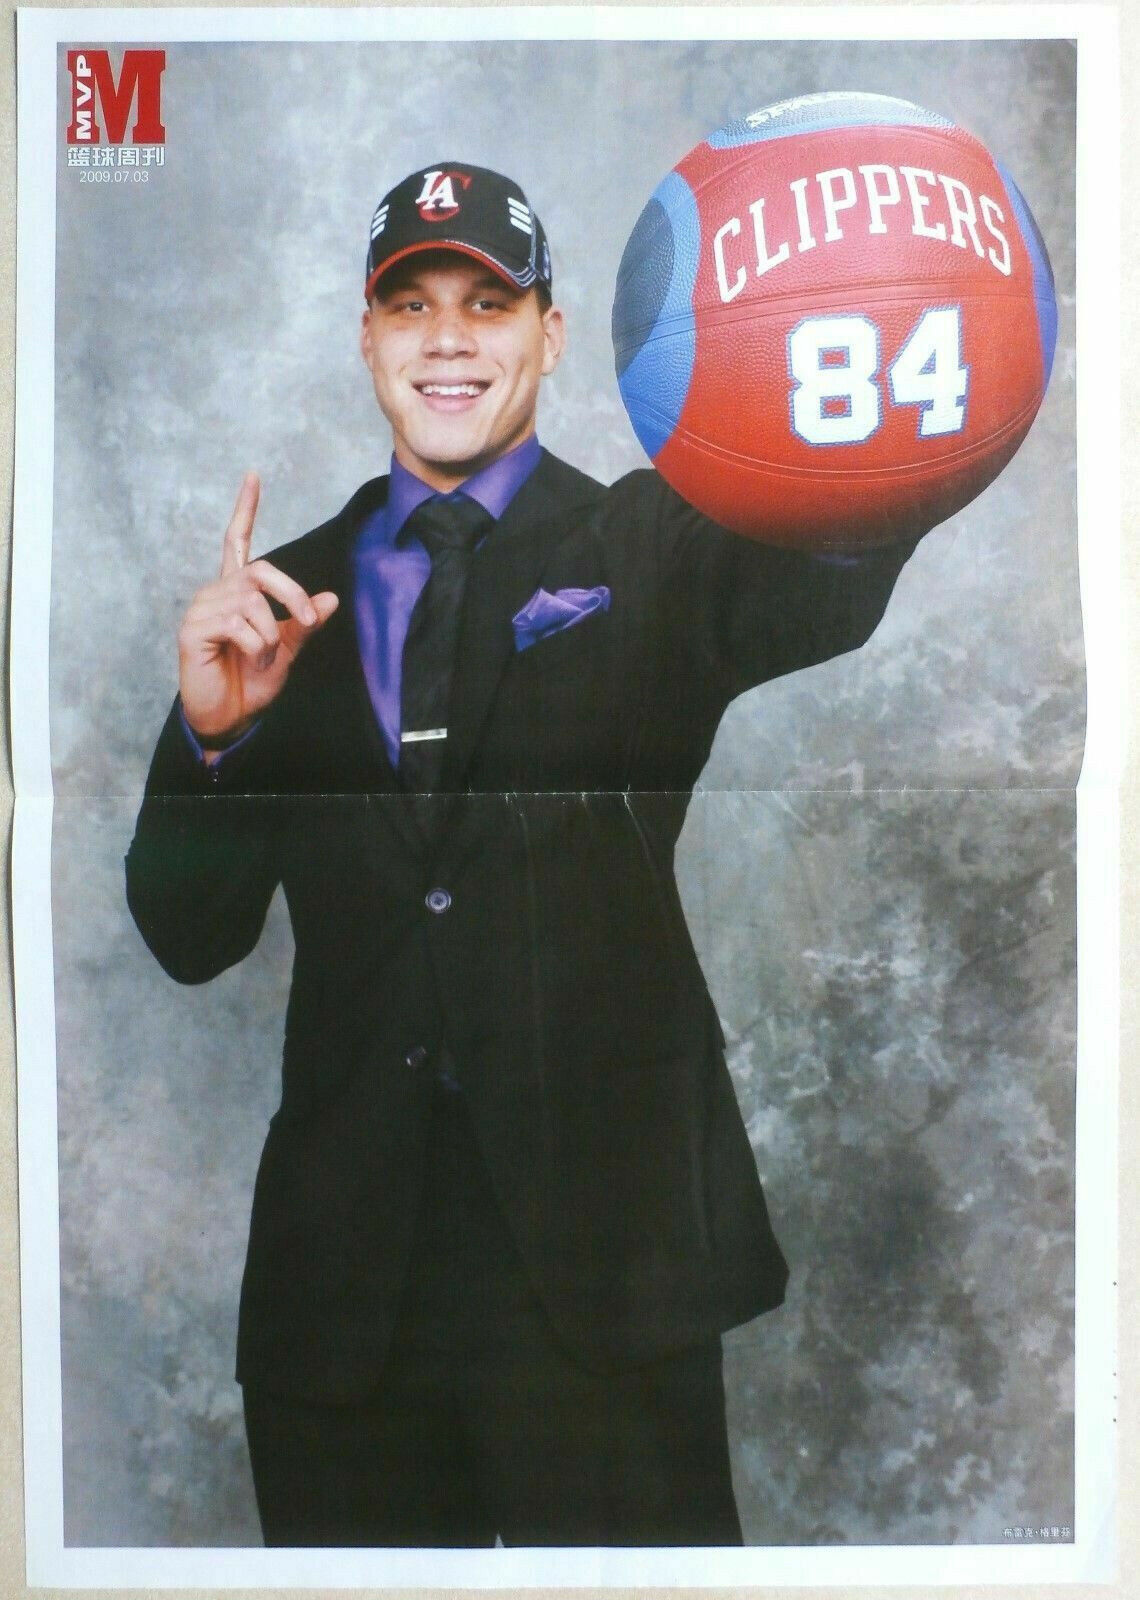 CHINA Poster - BLAKE GRIFFIN - LOS ANGELES CLIPPERS - \